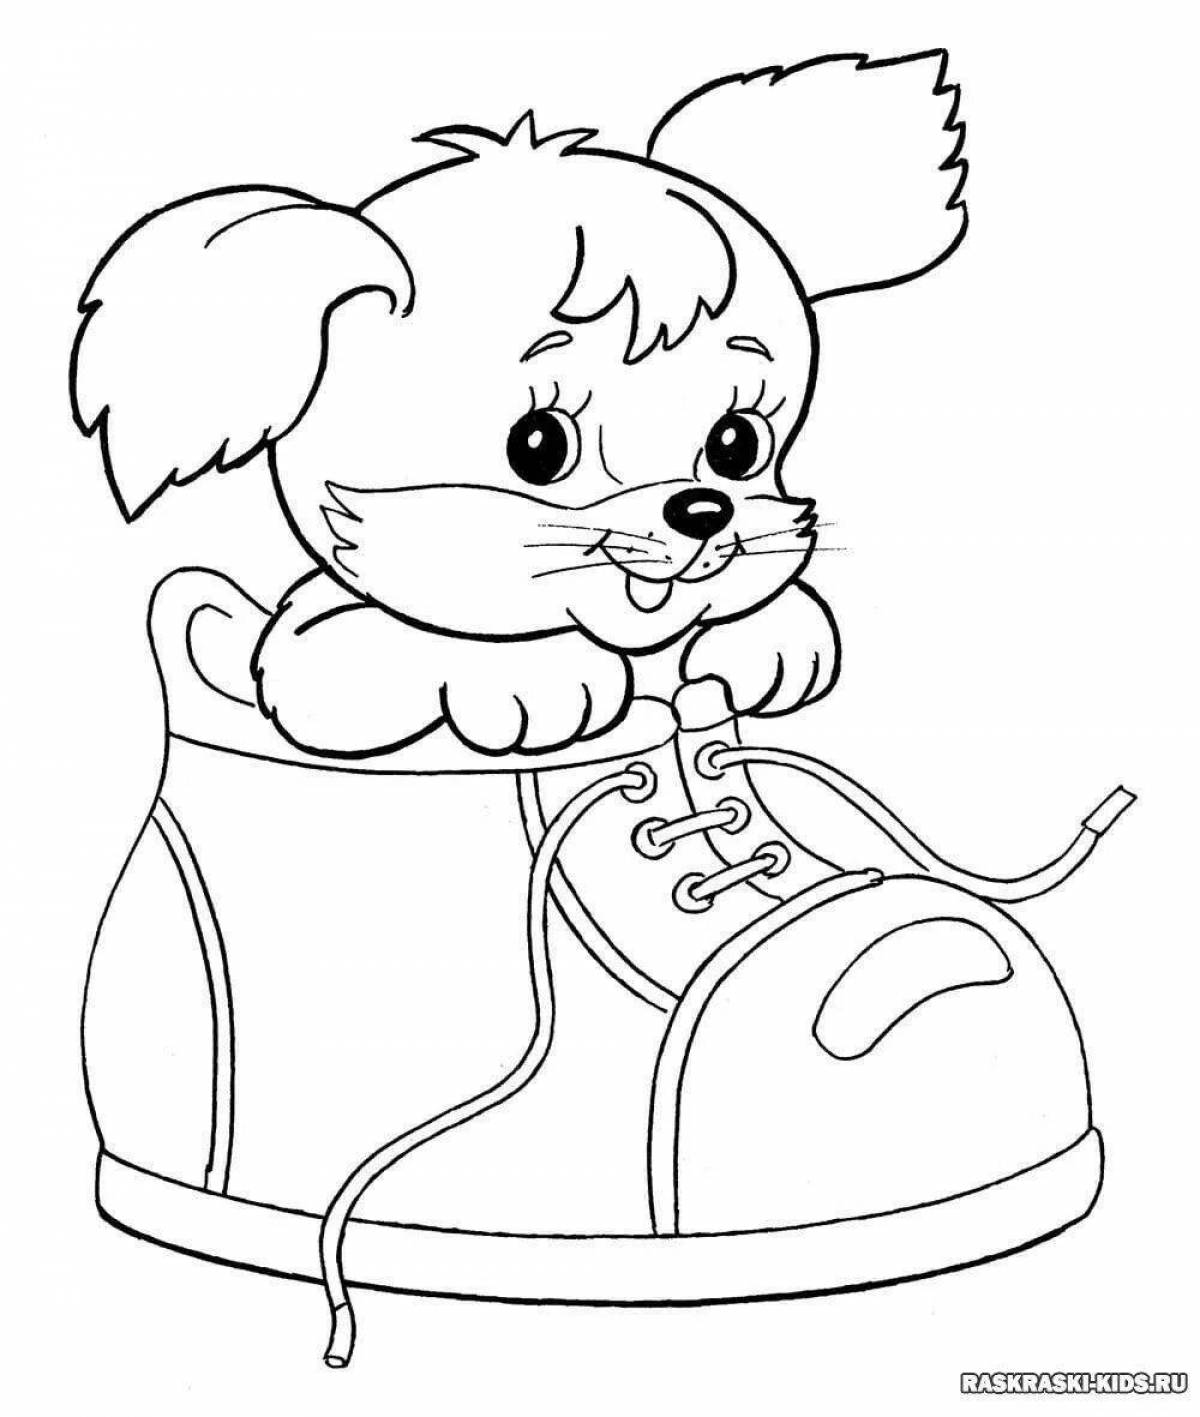 Dog coloring page for 5-6 year olds